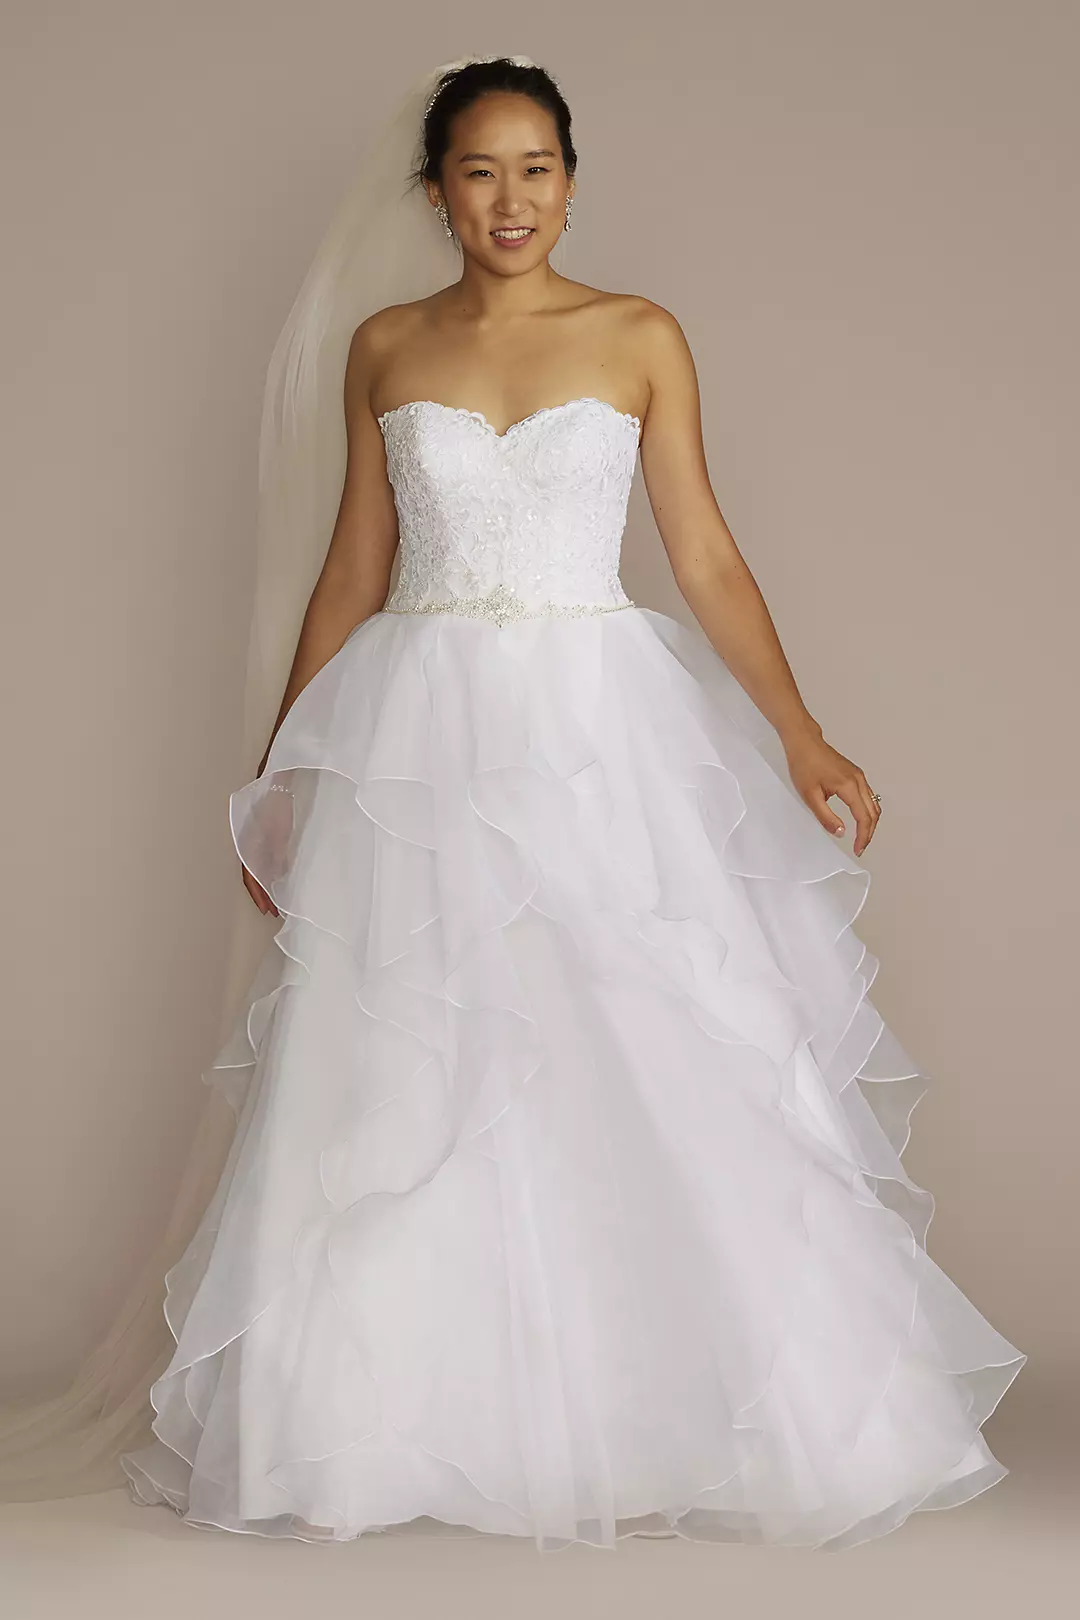 Lace and Organza Petite Wedding Ball Gown Image